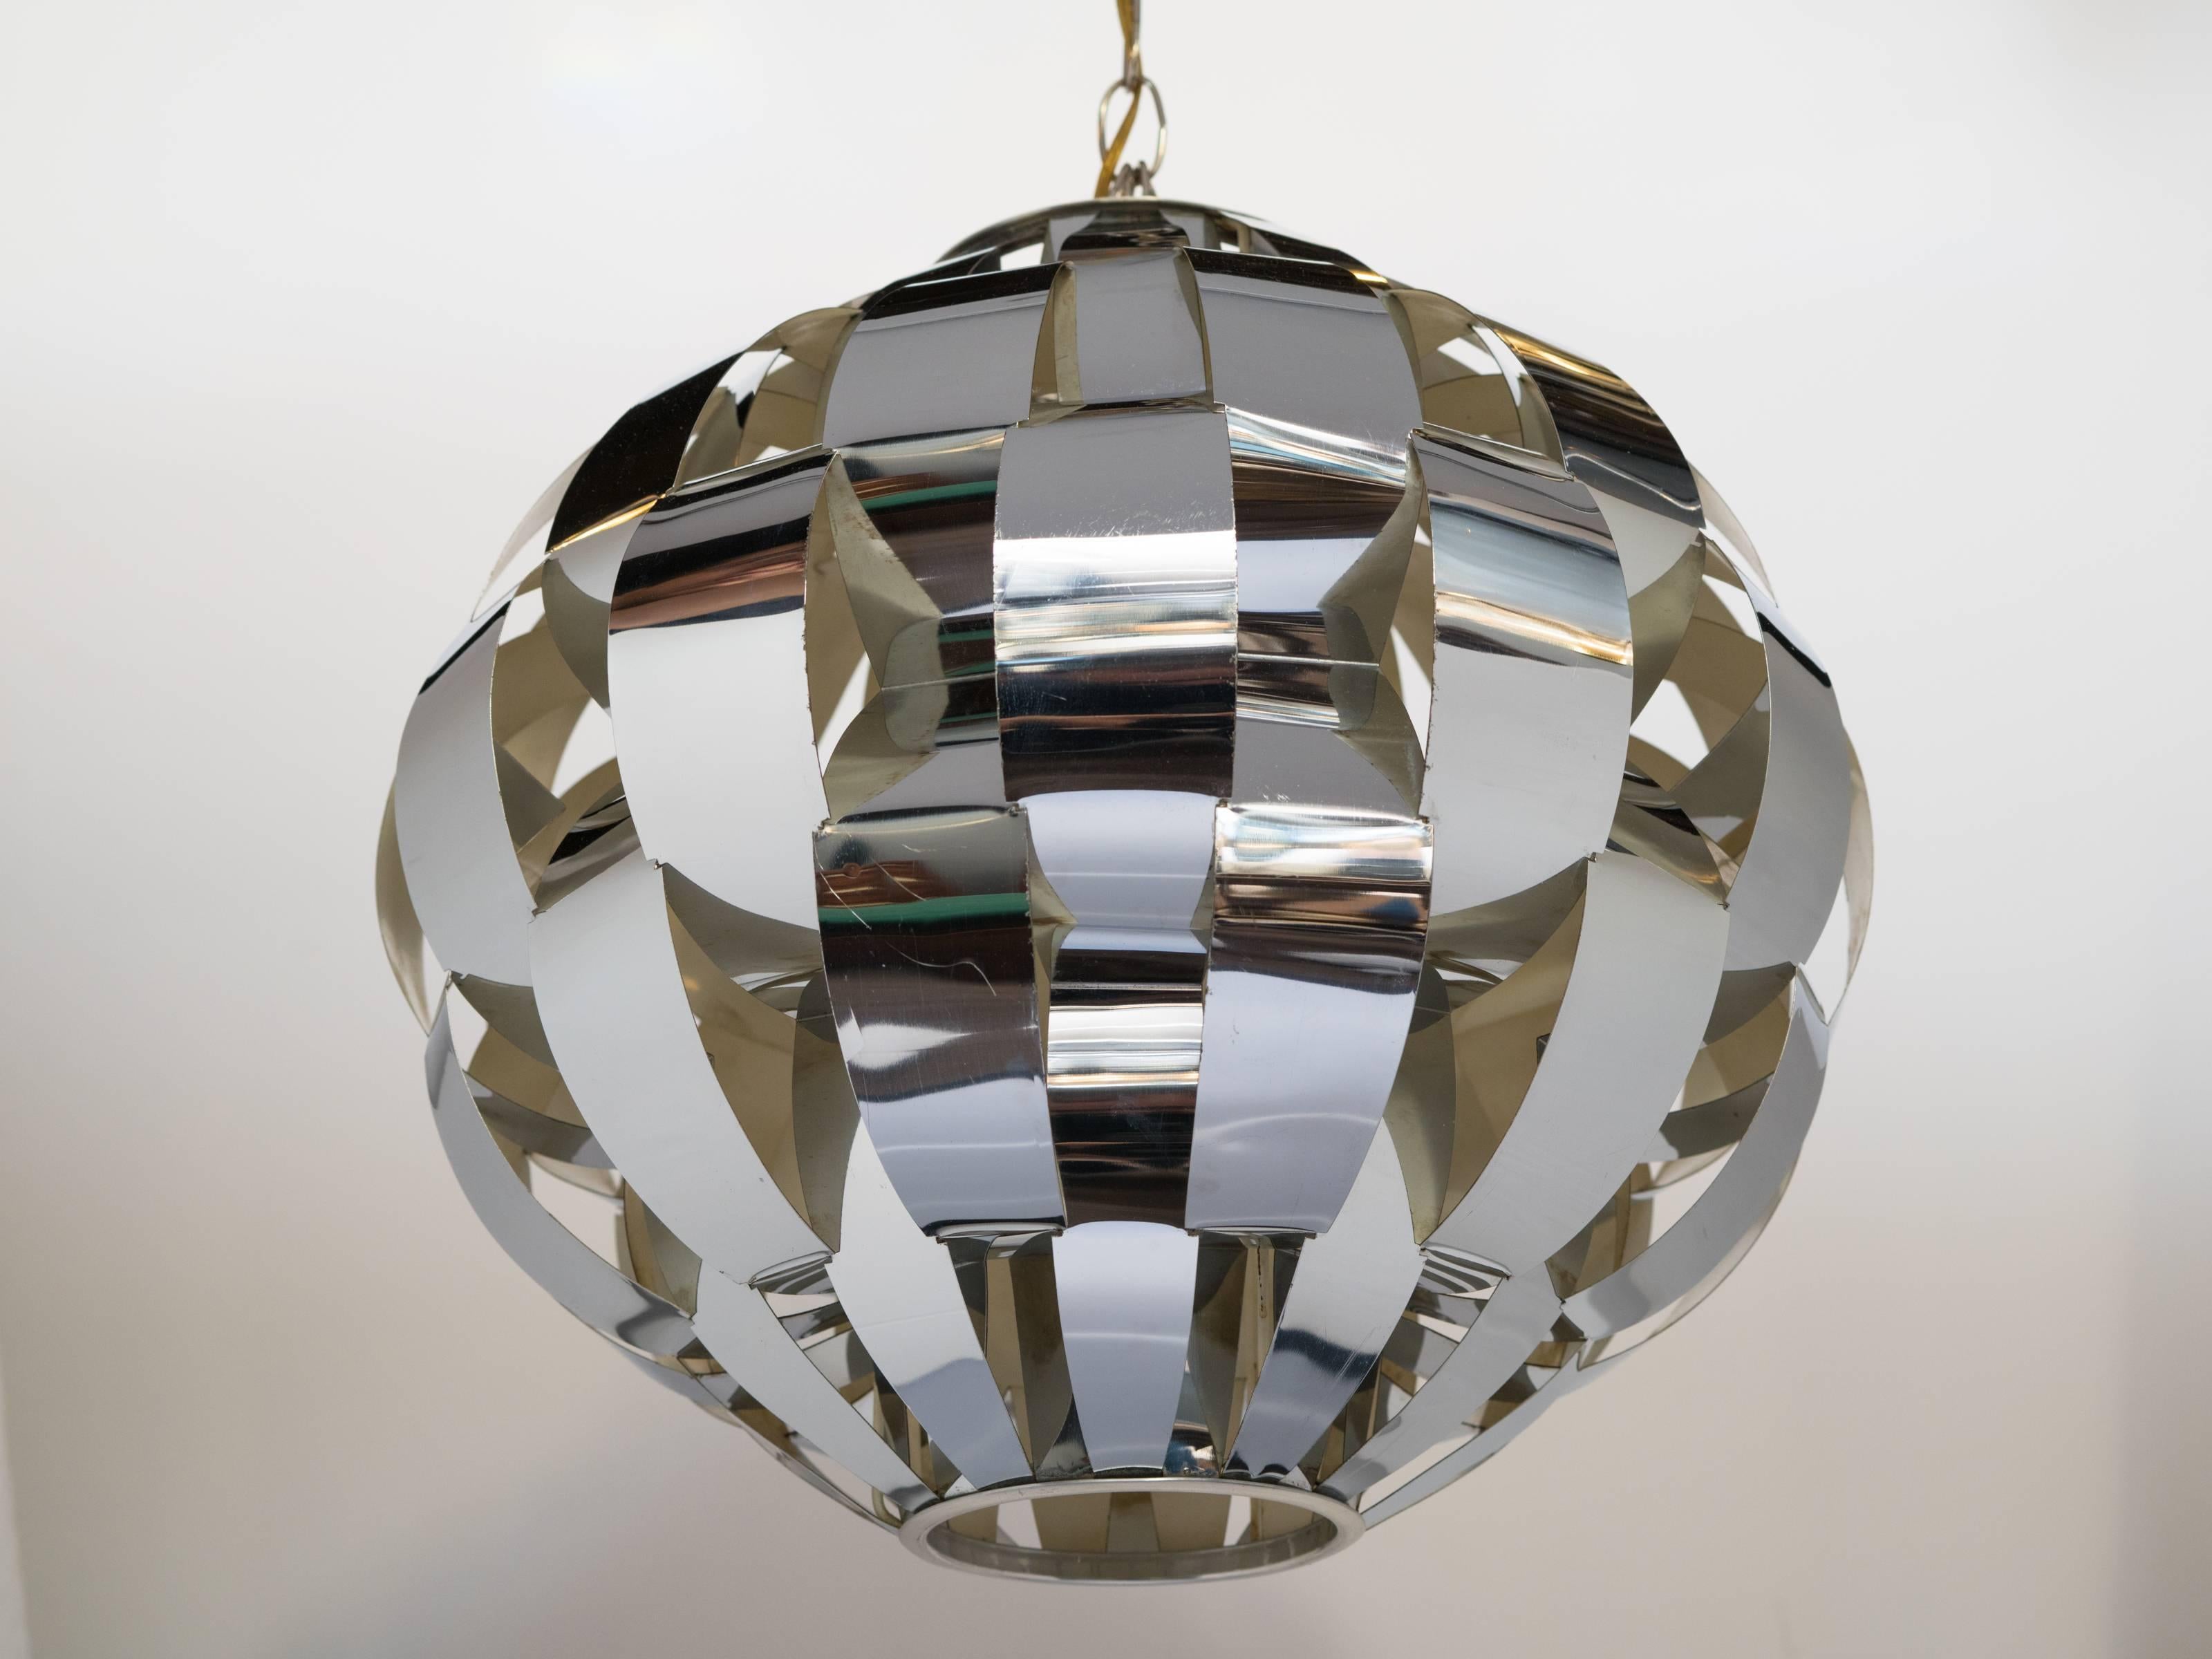 Iconic mid-century modern pendant light consisting of bent chrome metal forming a woven, ribbon design. Polished chrome with white enamel finished interior. Highly reflective along all the openings and features one central down light.